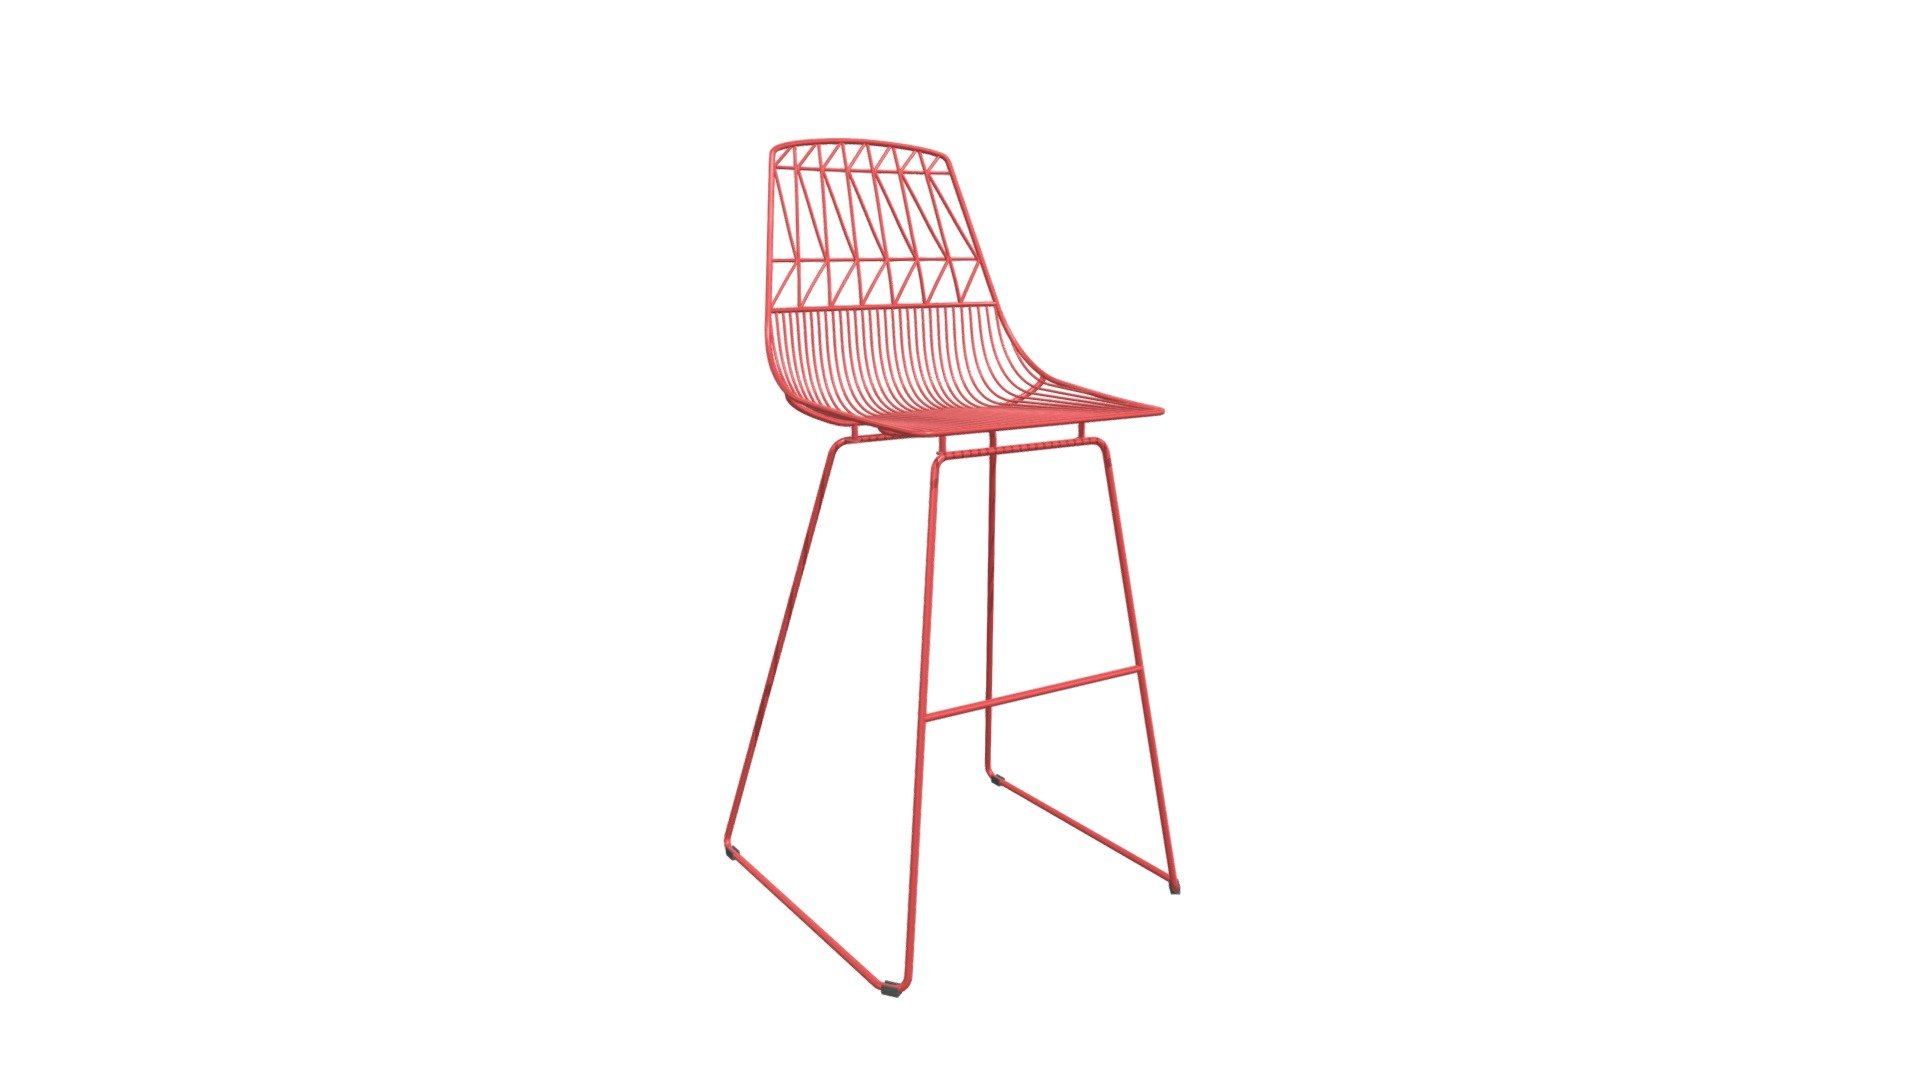 https://zuomod.com/brody-bar-chair-red

Live wire. This sculptural bar chair is amped up with pattern and movement. Eye candy placed on your patio or deck, but also striking indoors. Its sleek style naturally compliments a modern kitchen island or bar table, but we also love the juxtaposition of it around a wood surface. Built to withstand the elements and add flair wherever it is placed 3d model